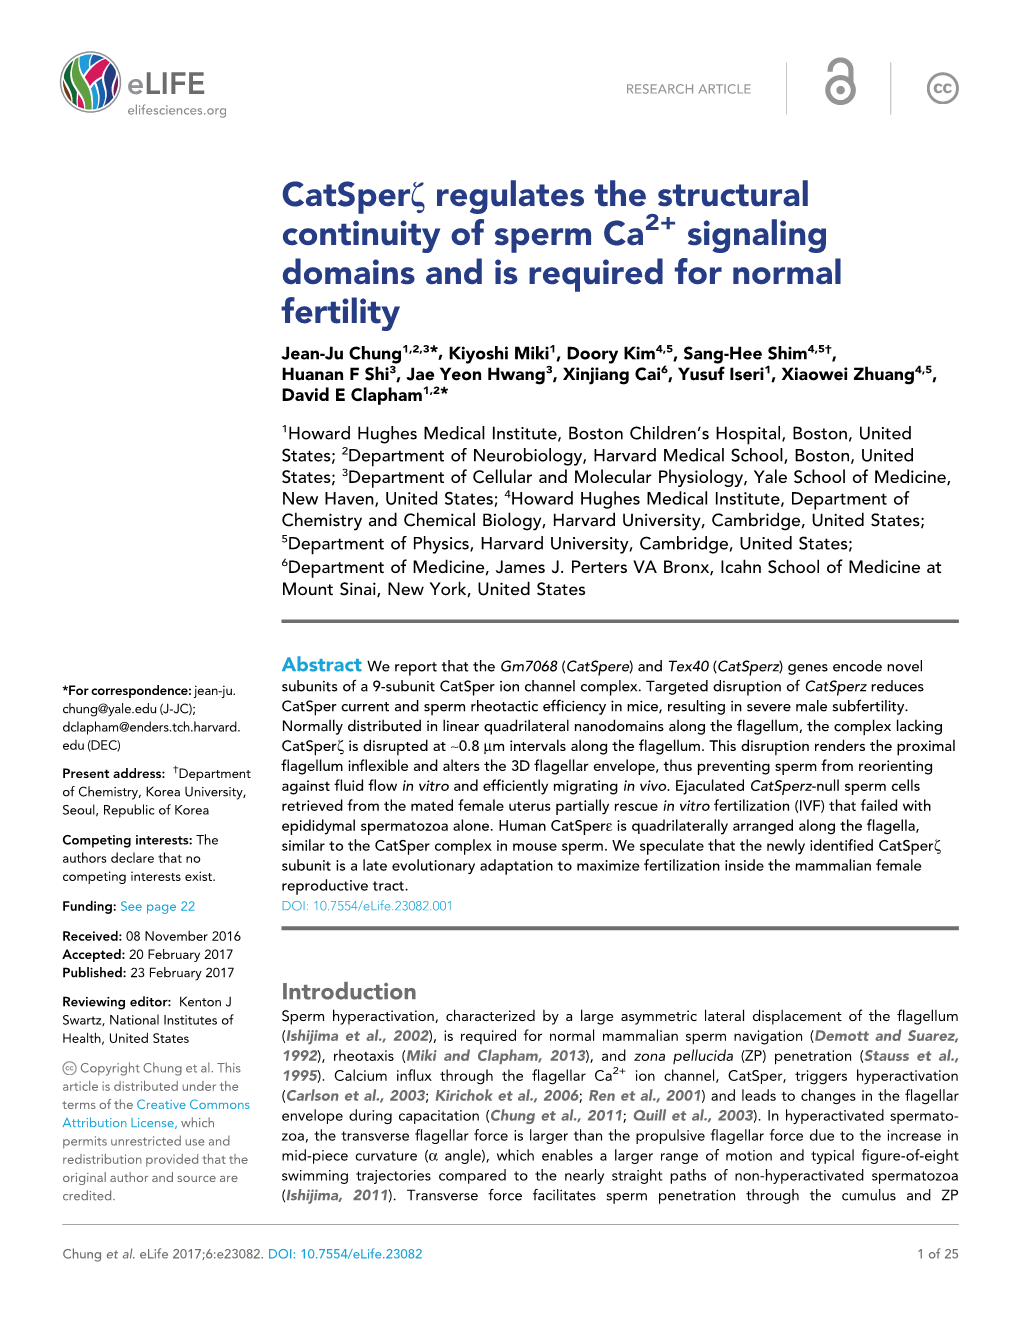 Catsperz Regulates the Structural Continuity of Sperm Ca Signaling